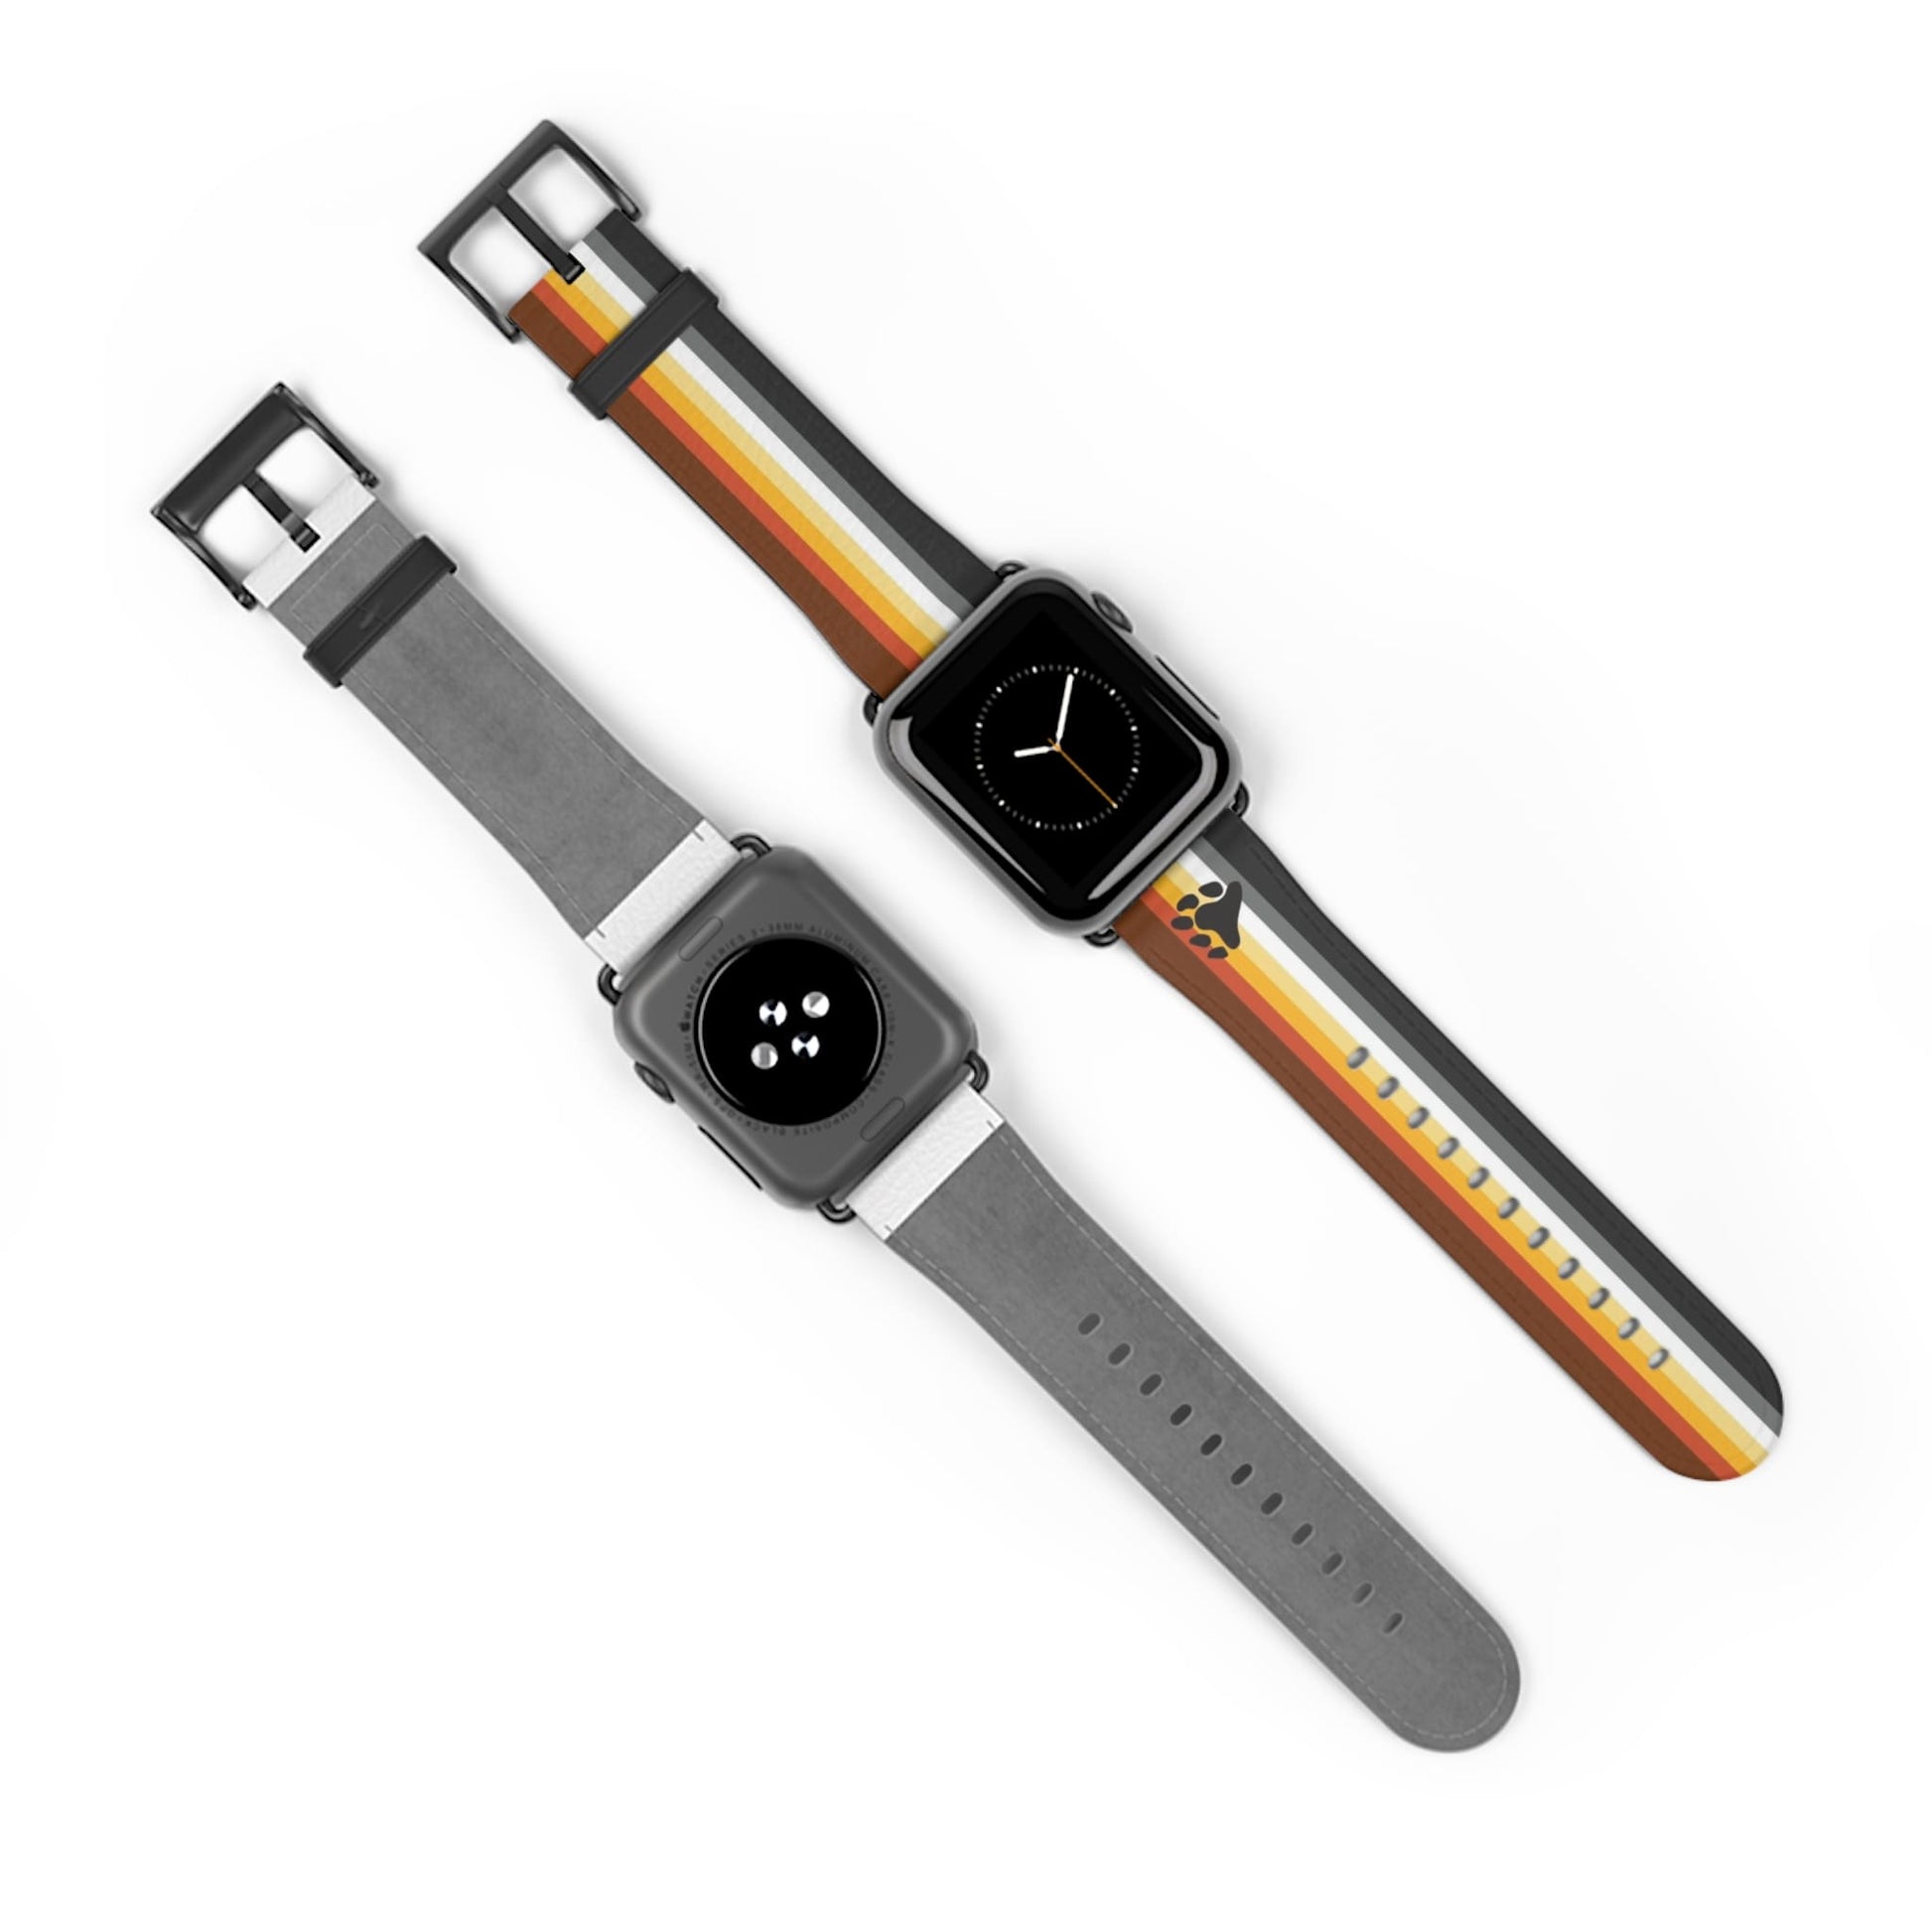 bear pride watch band for Apple iwatch